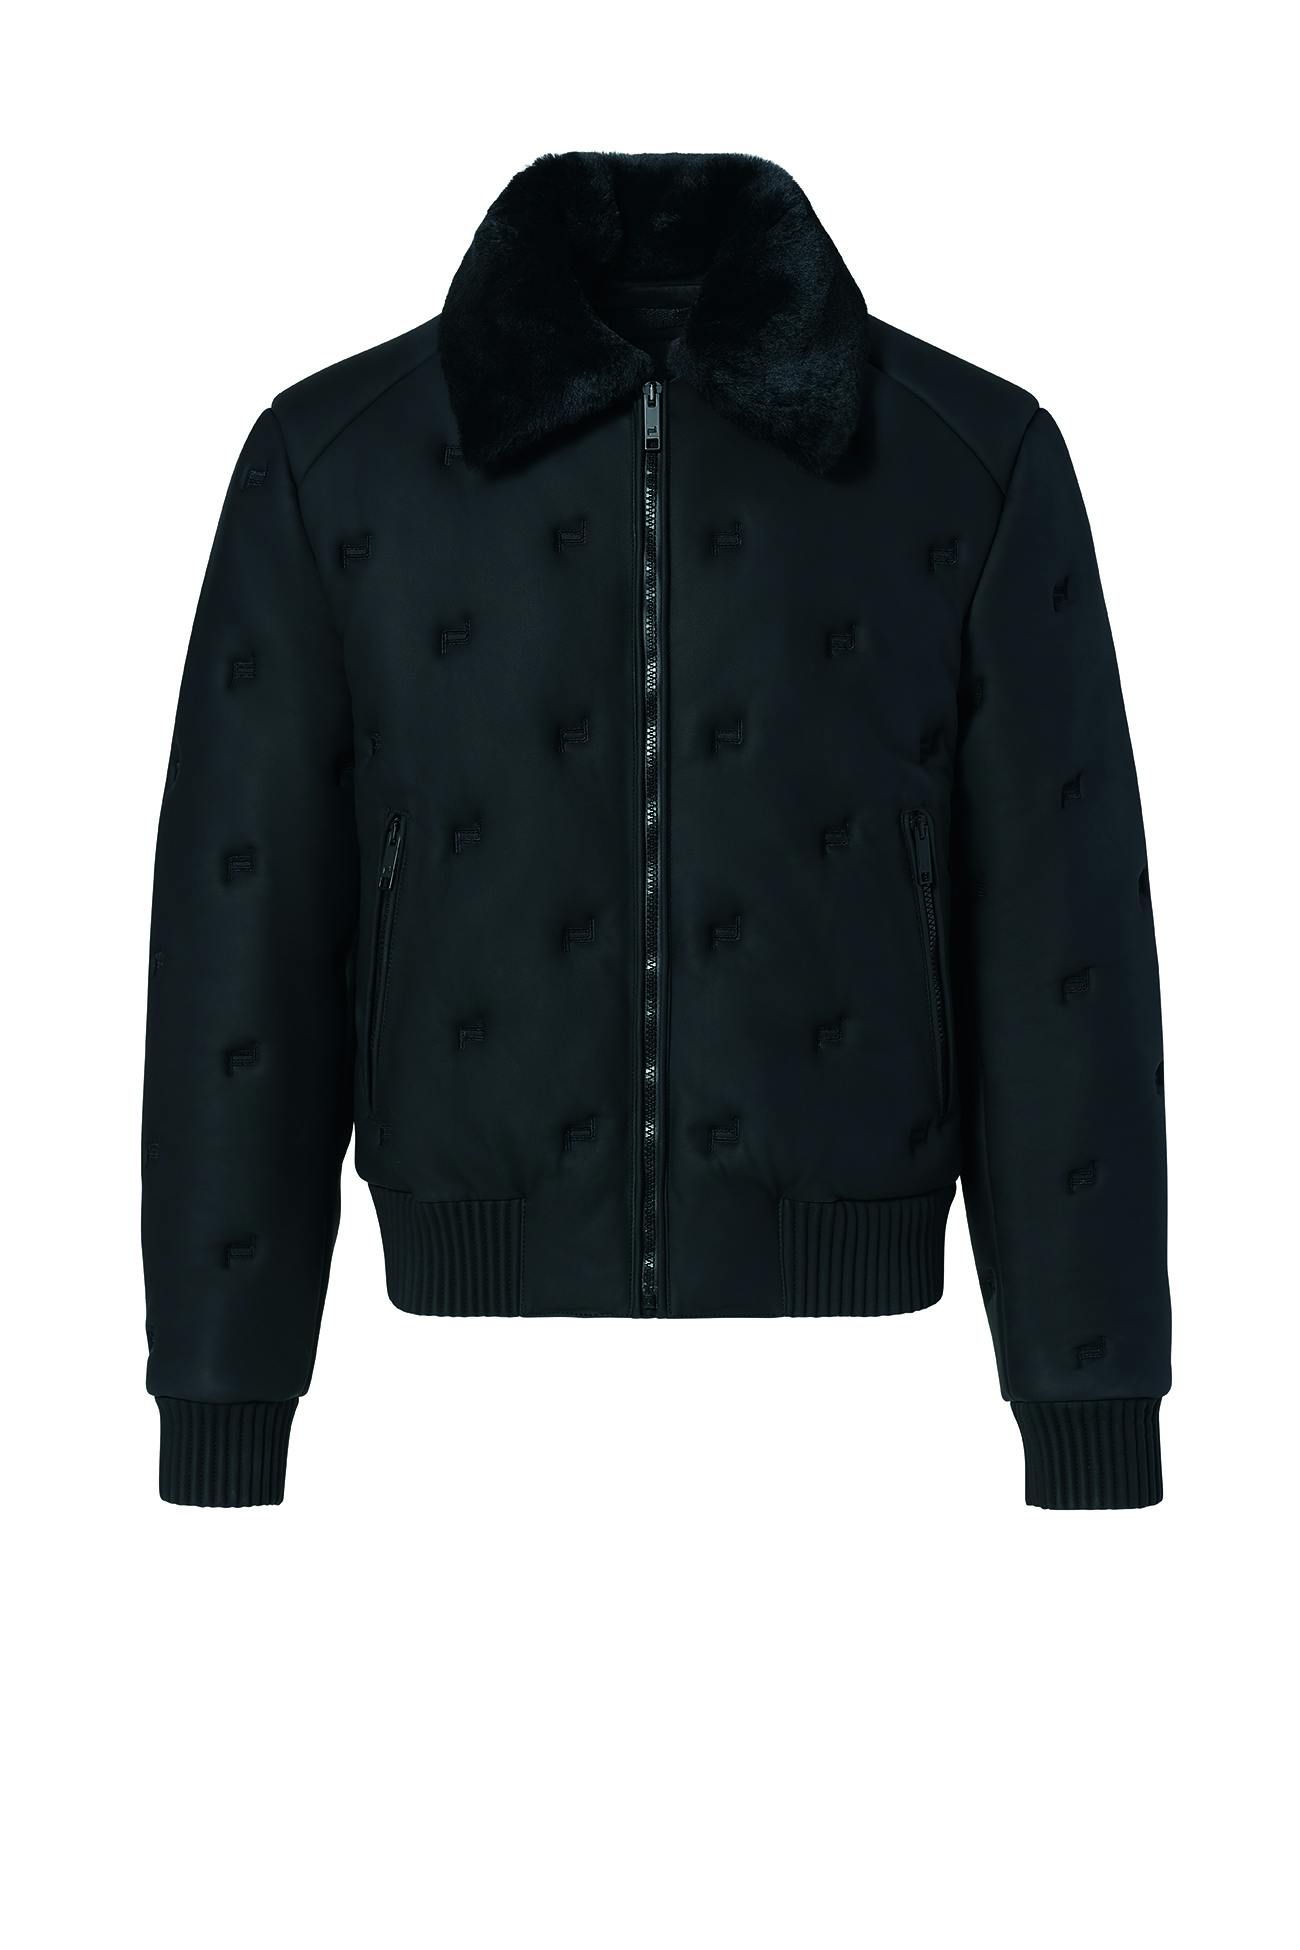 PD_PD ICON LEATHER BOMBER_4046901569419